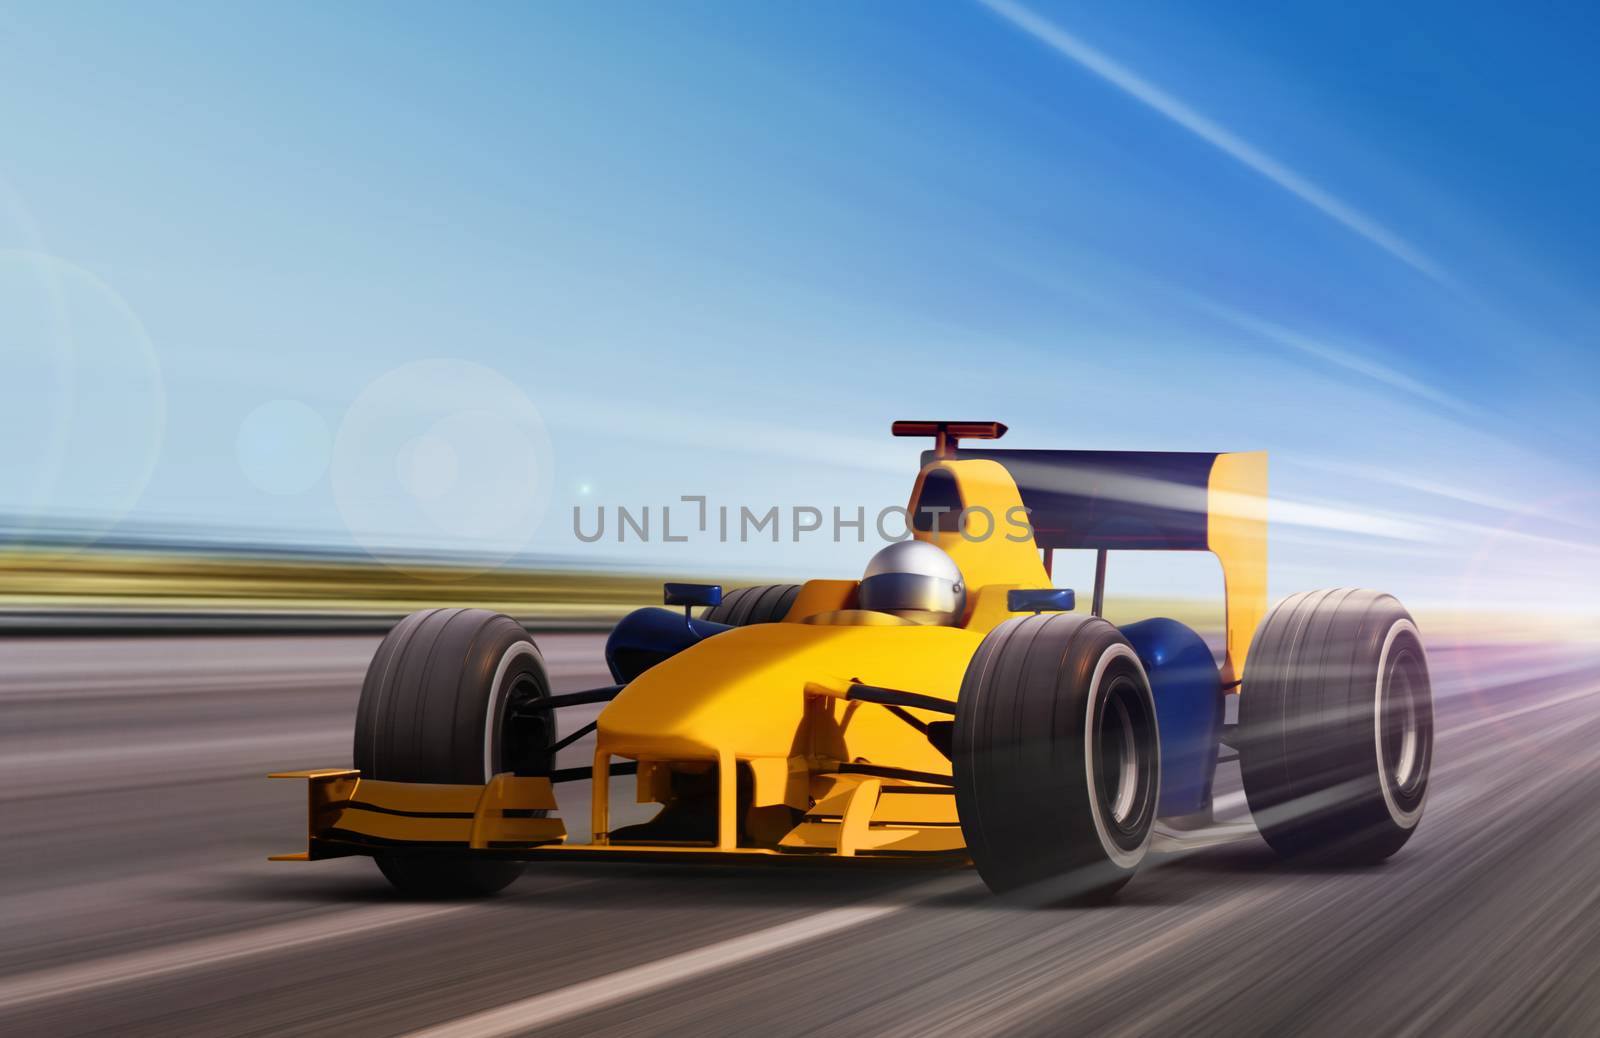 formula one race car on speed track - motion blur